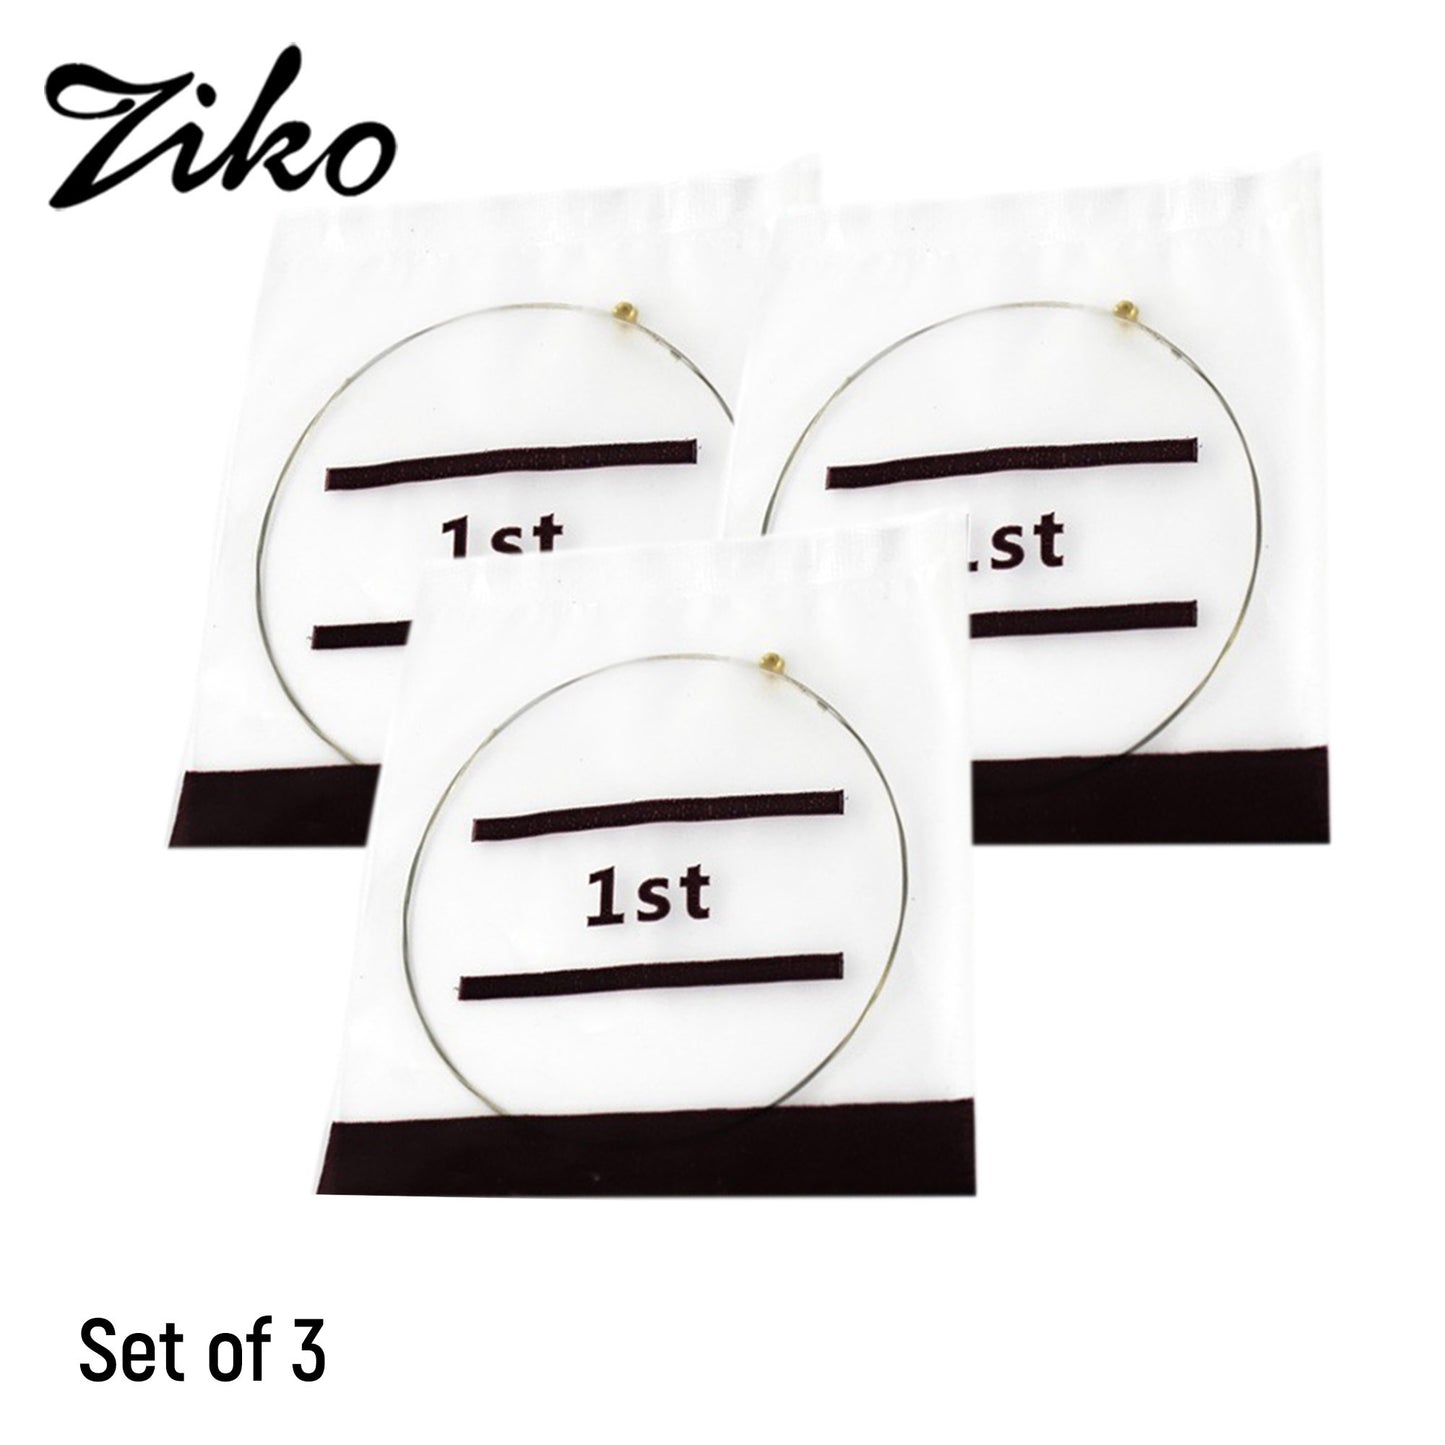 Ziko (1st String) Singles for Acoustic Guitar